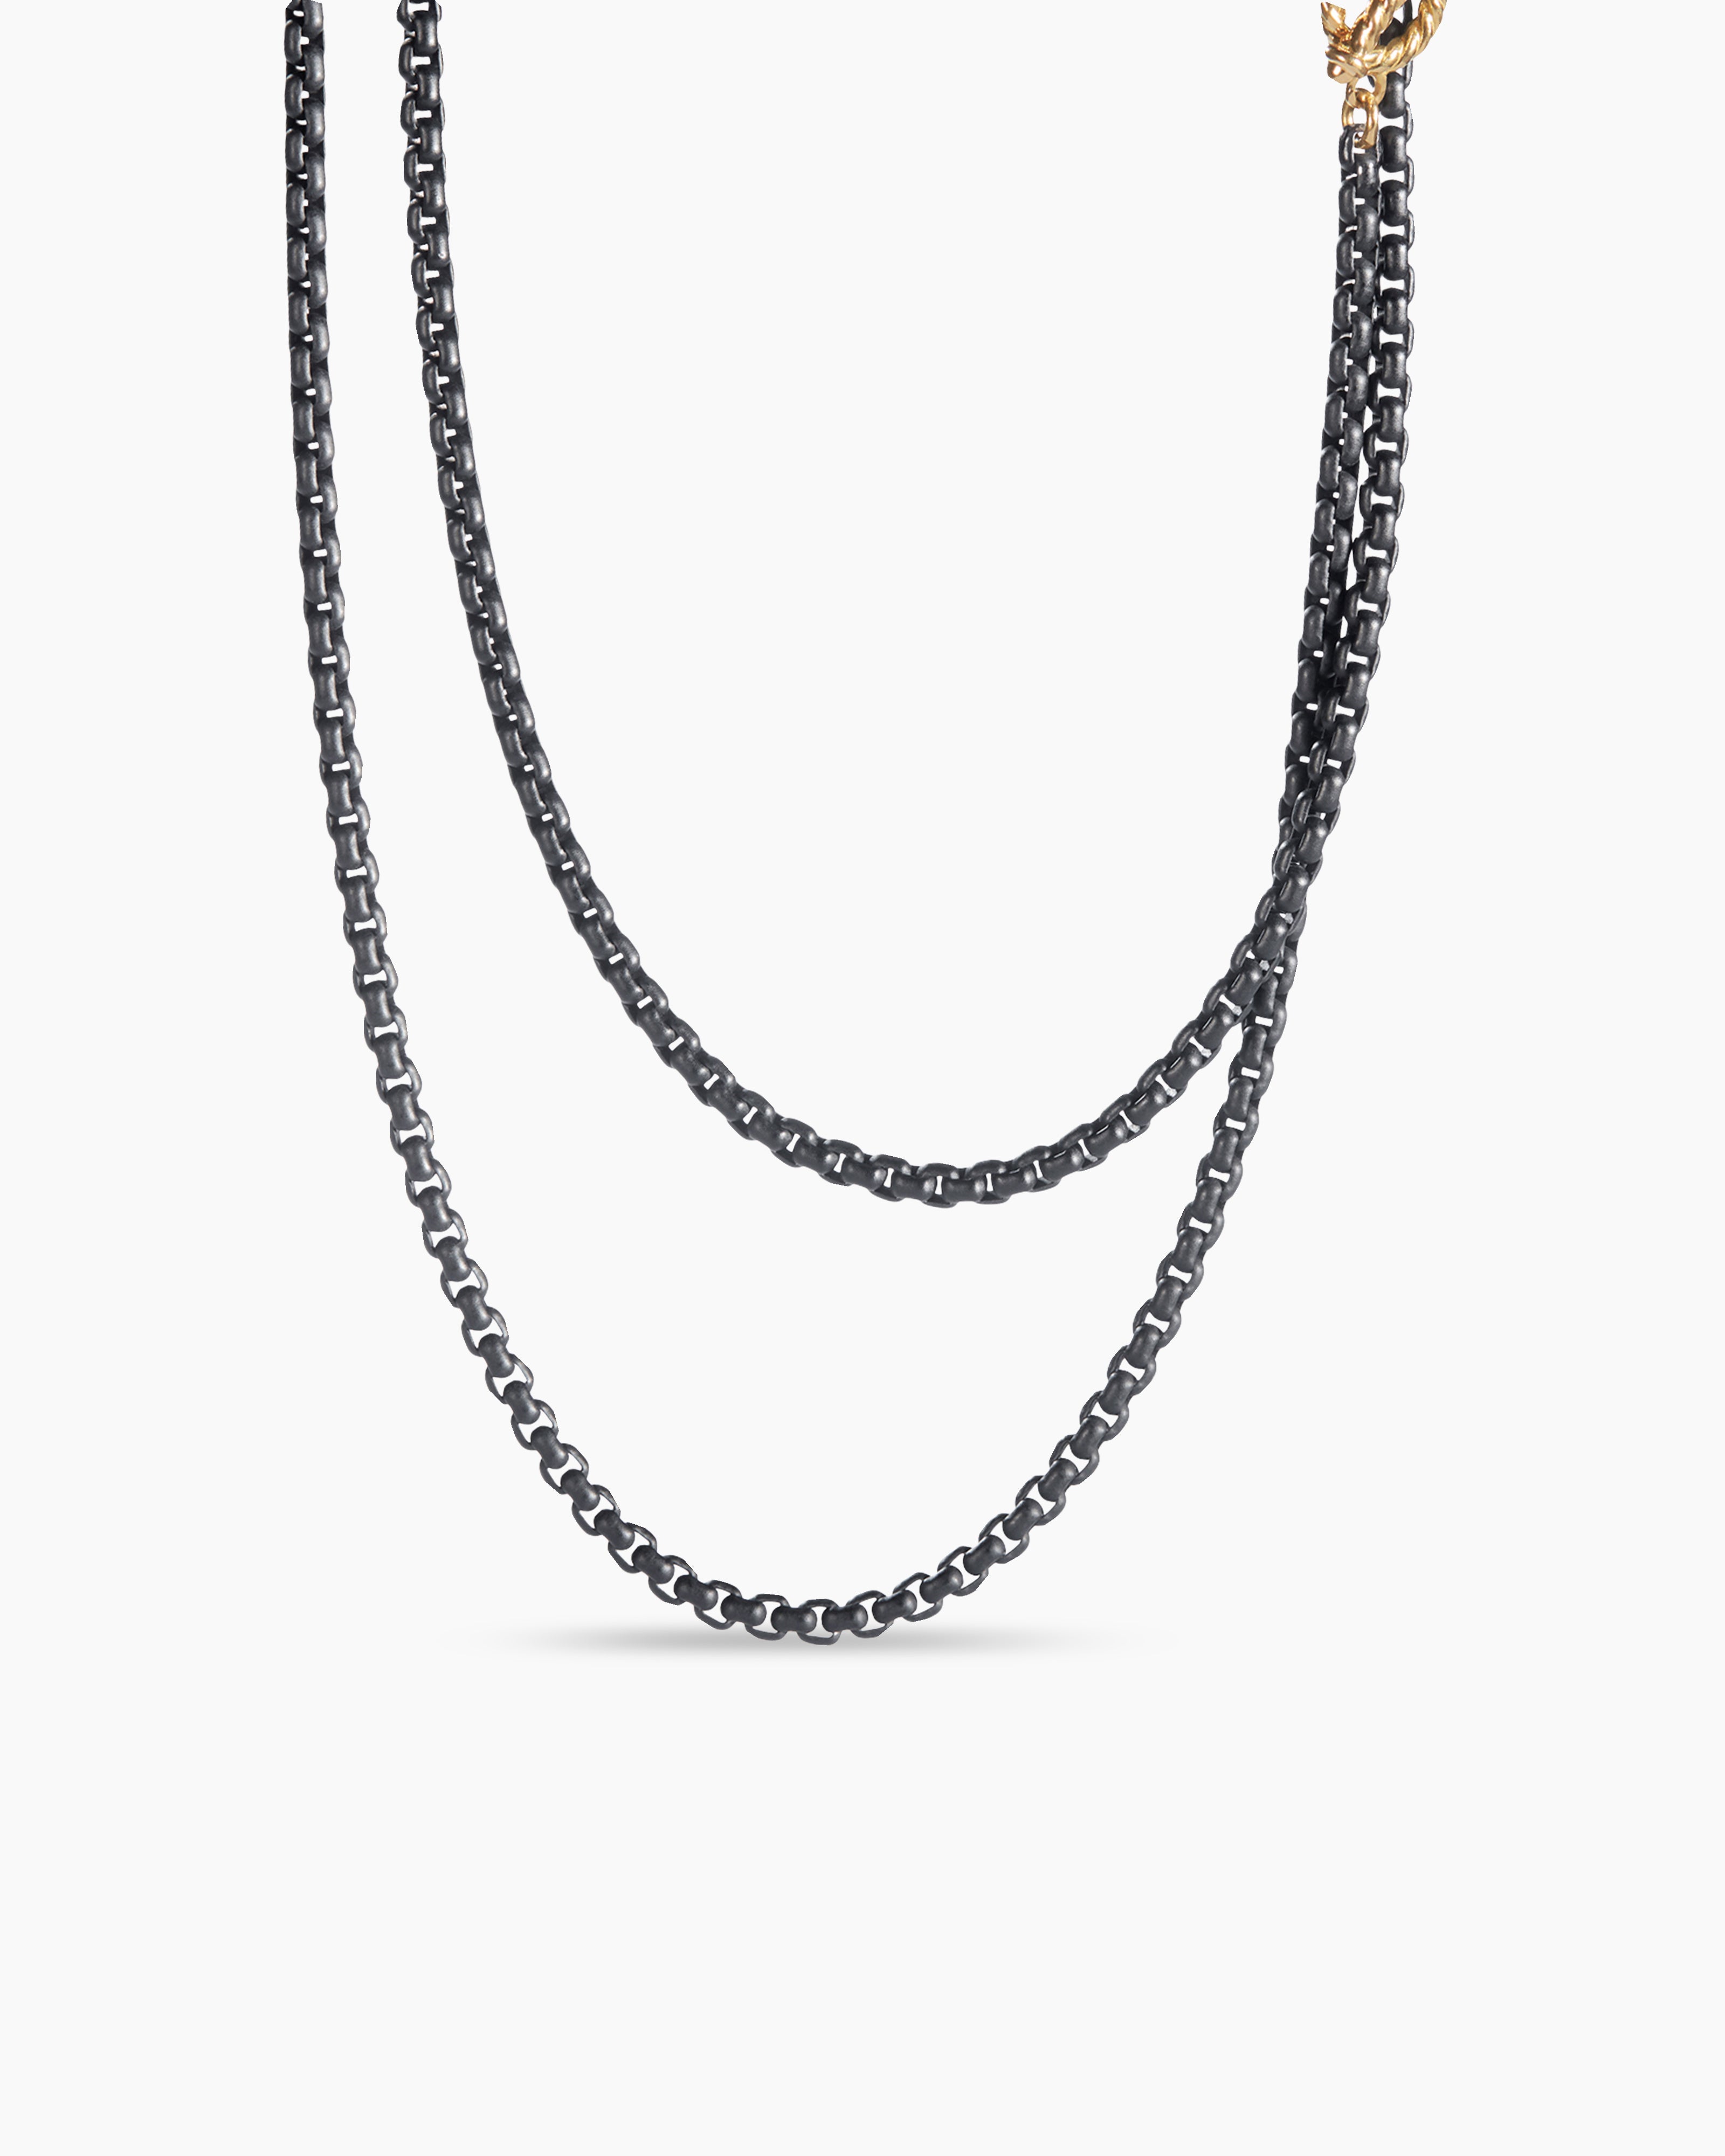 Featured Wholesale transparent chain necklace For Men and Women